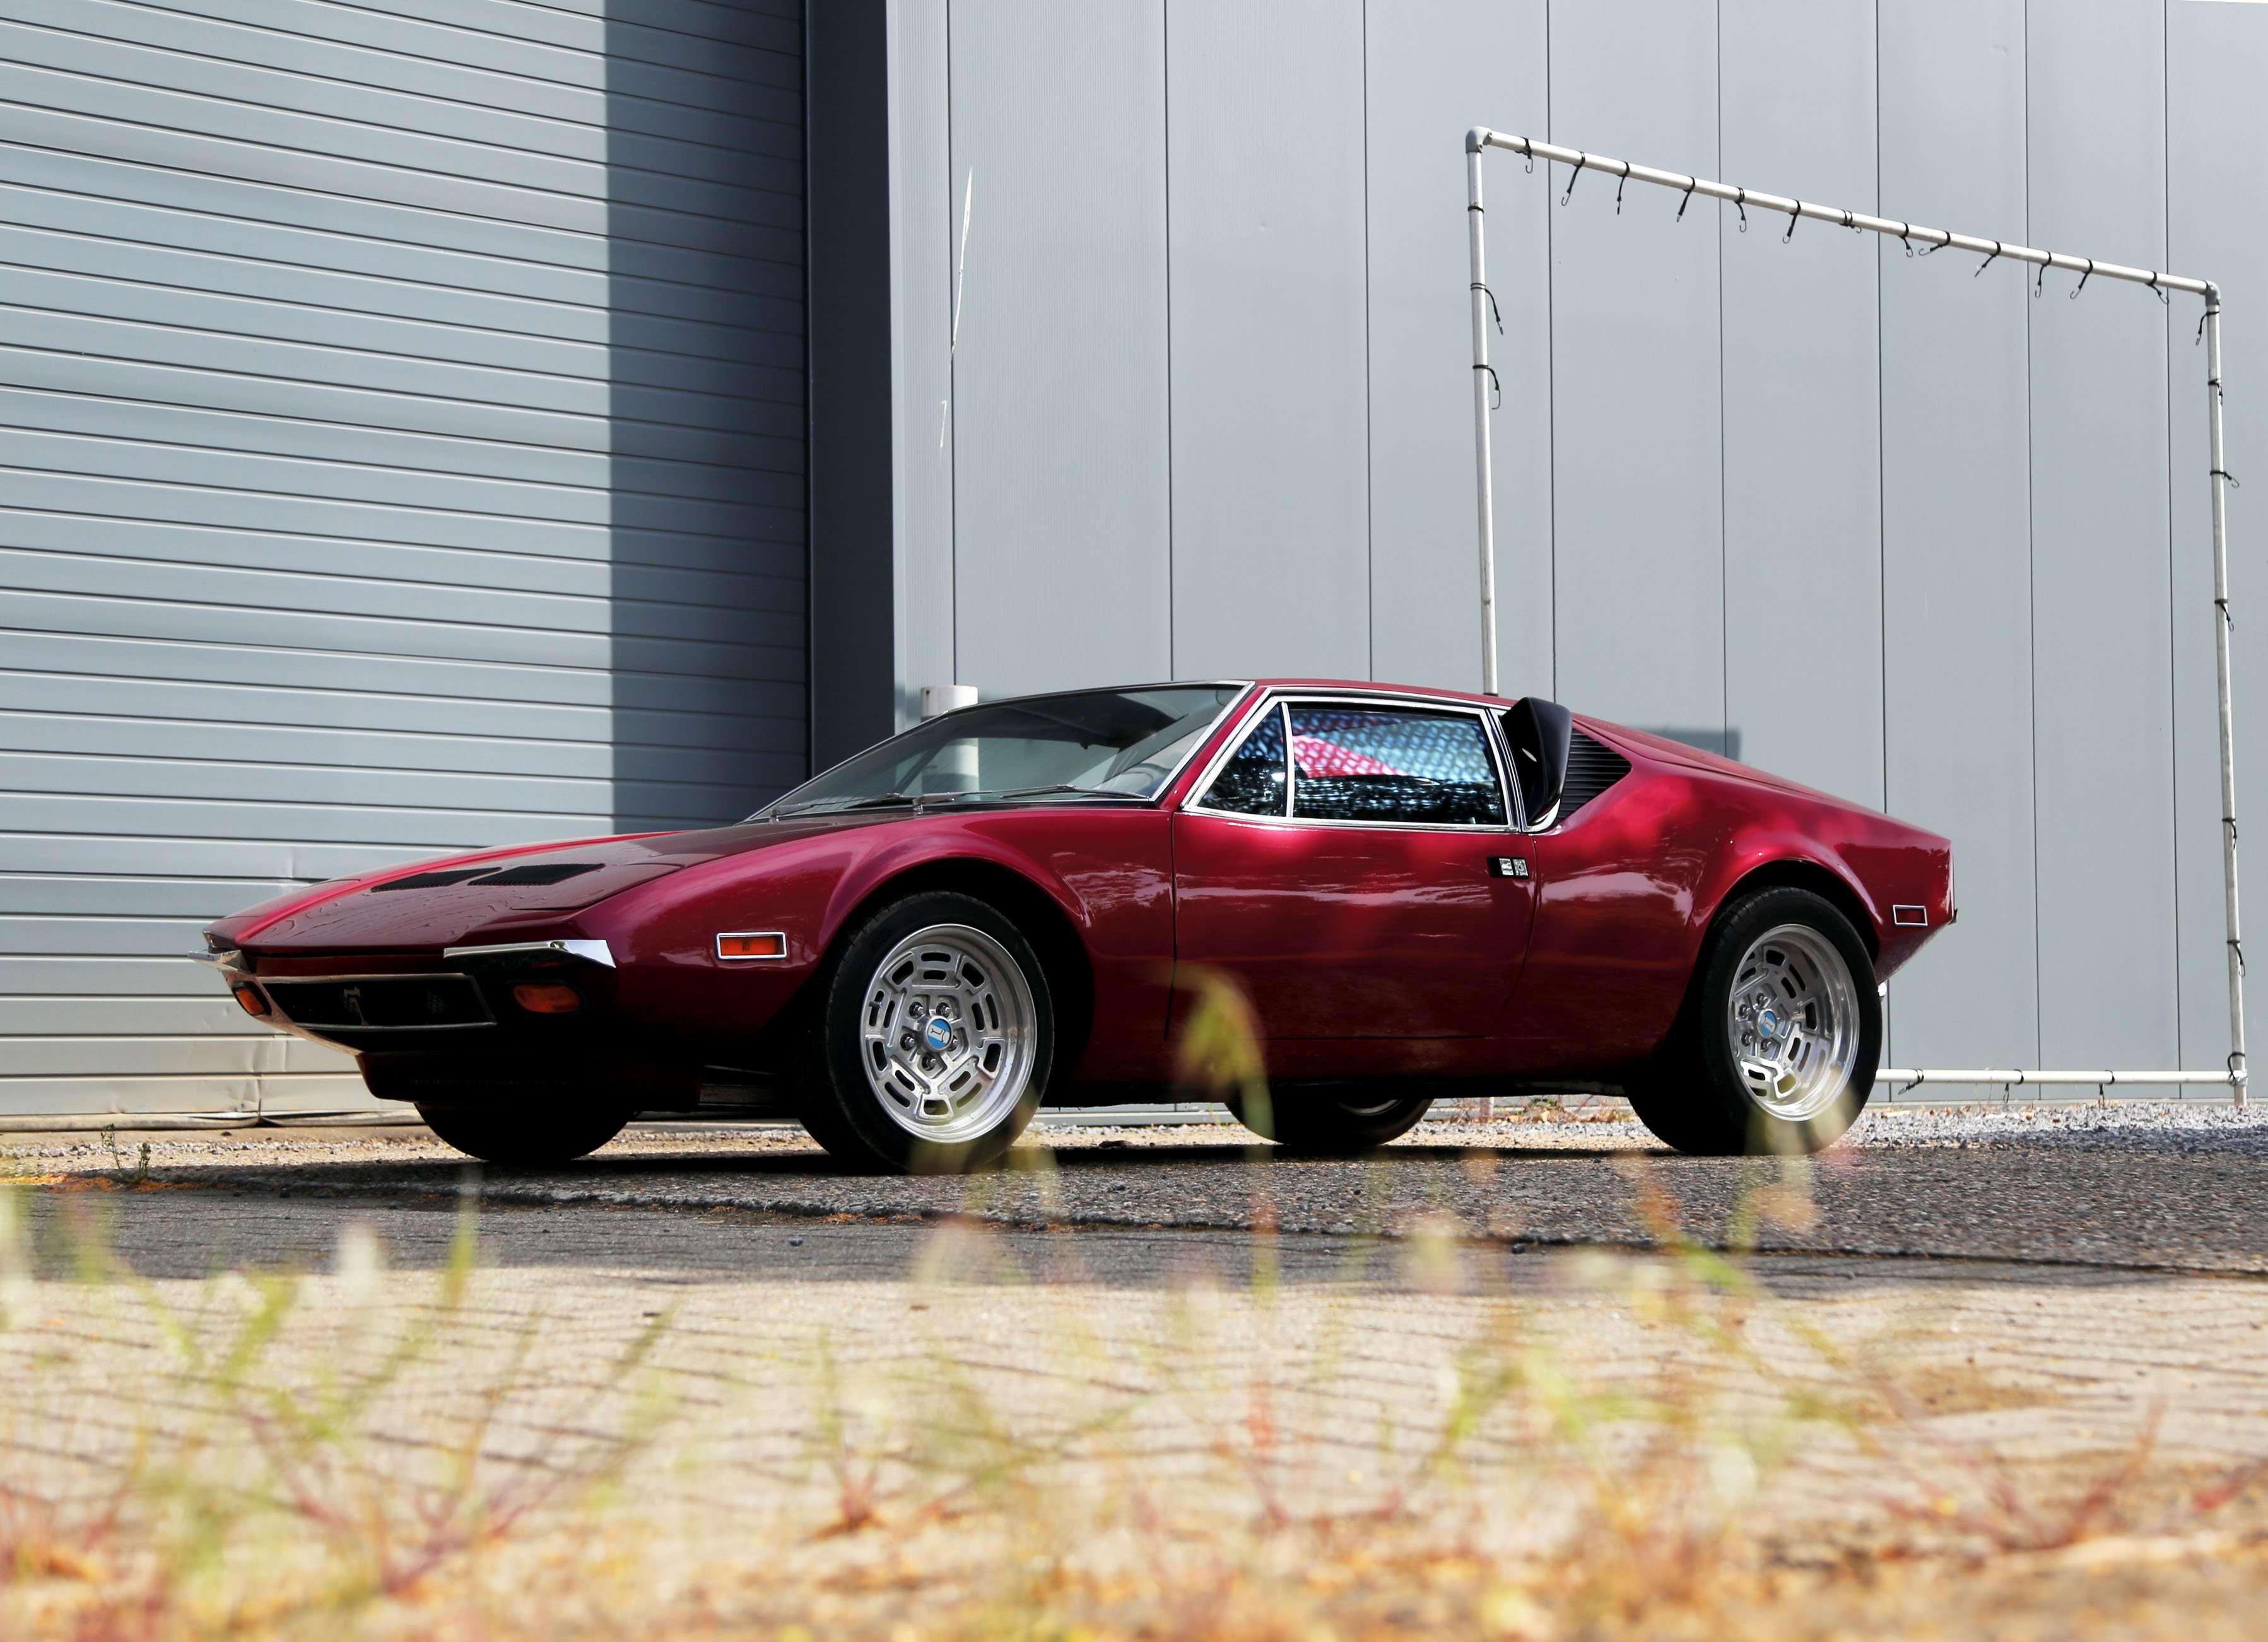 De Tomaso Pantera Coupe in Violet used in Zonhoven for € 999,999.-